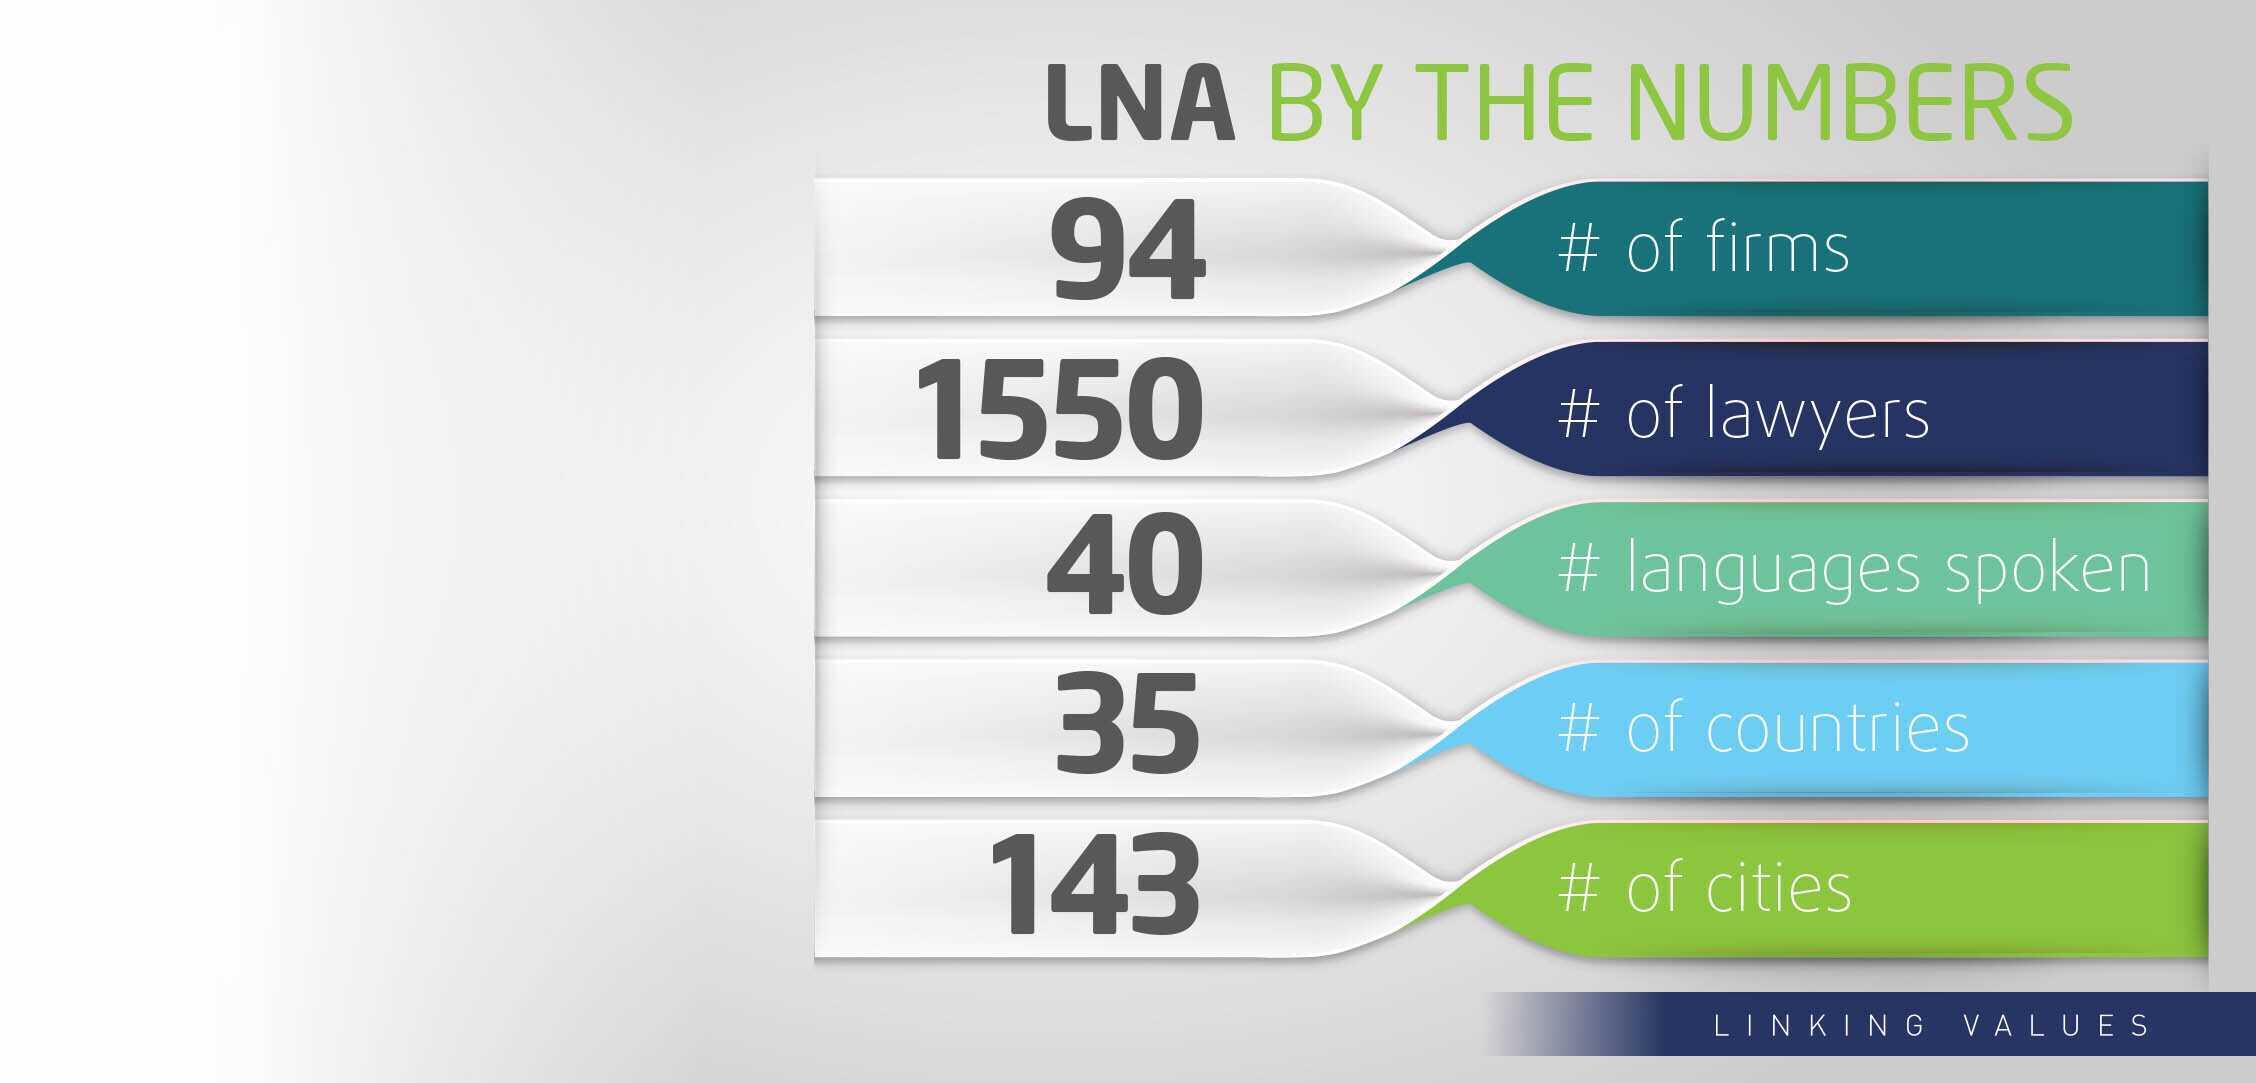 LNA by the numbers: 94 firms, 1550 lawyers, 40 languages spoken, 35 countries, 143 cities